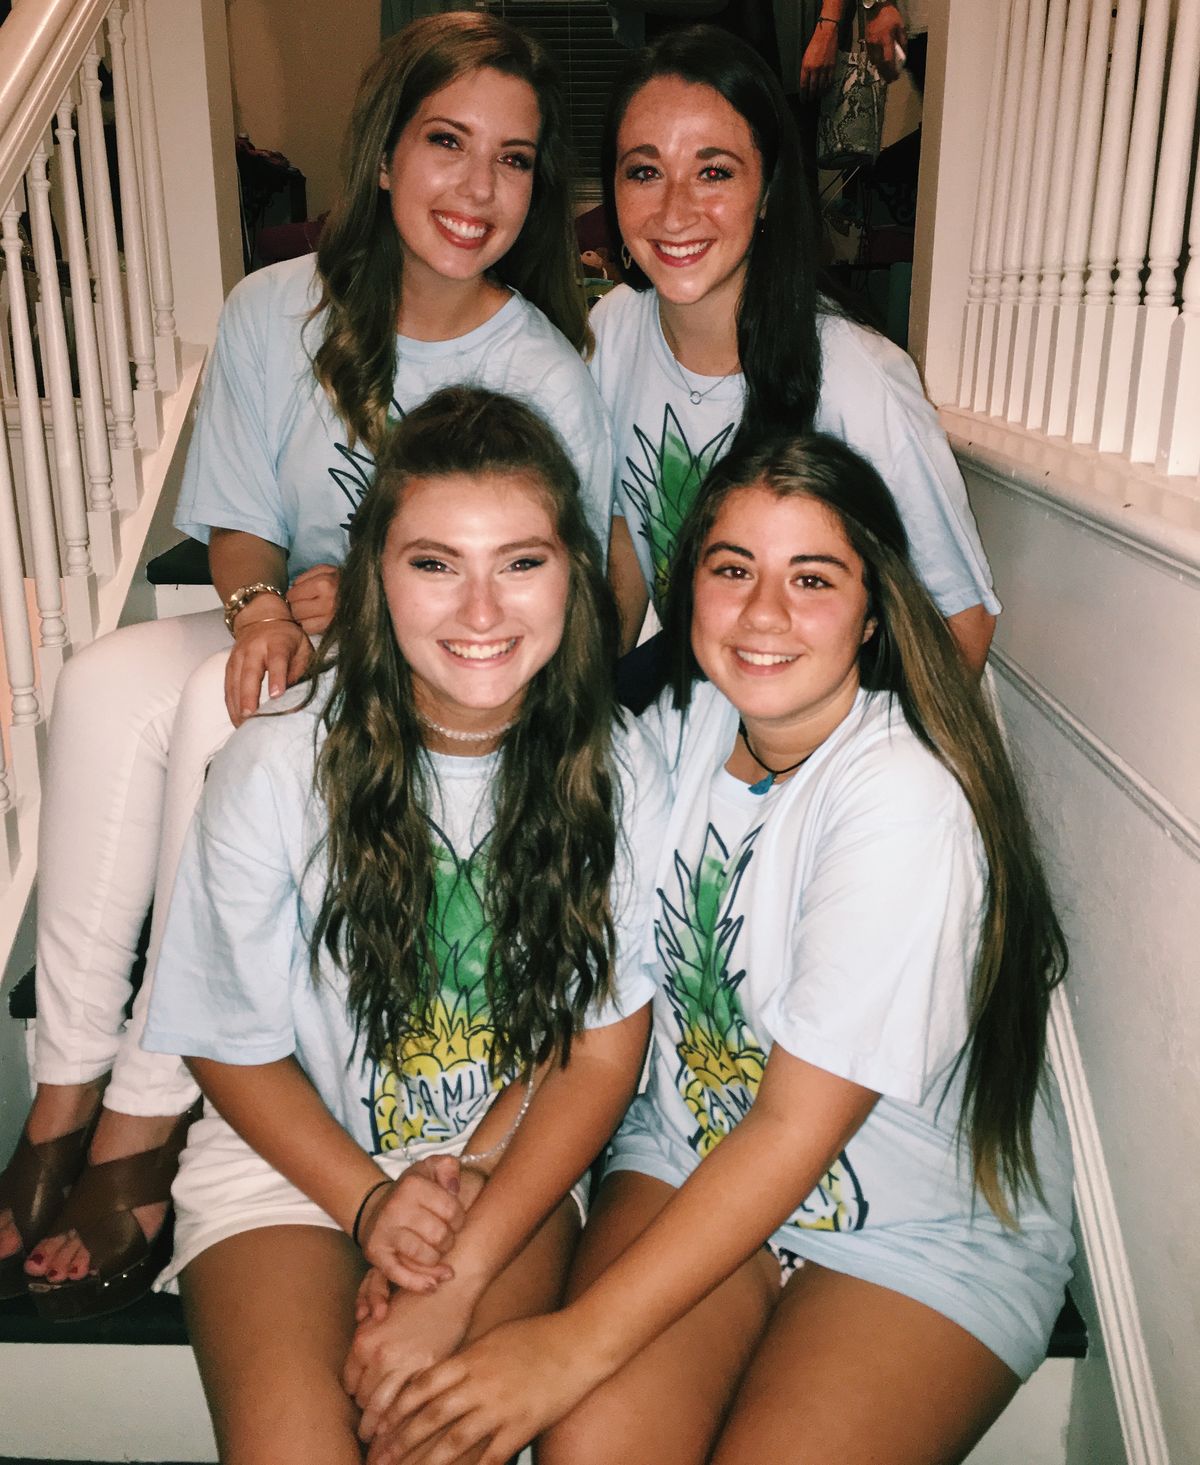 A Letter To My Sorority Family As I Prepare To Disaffiliate